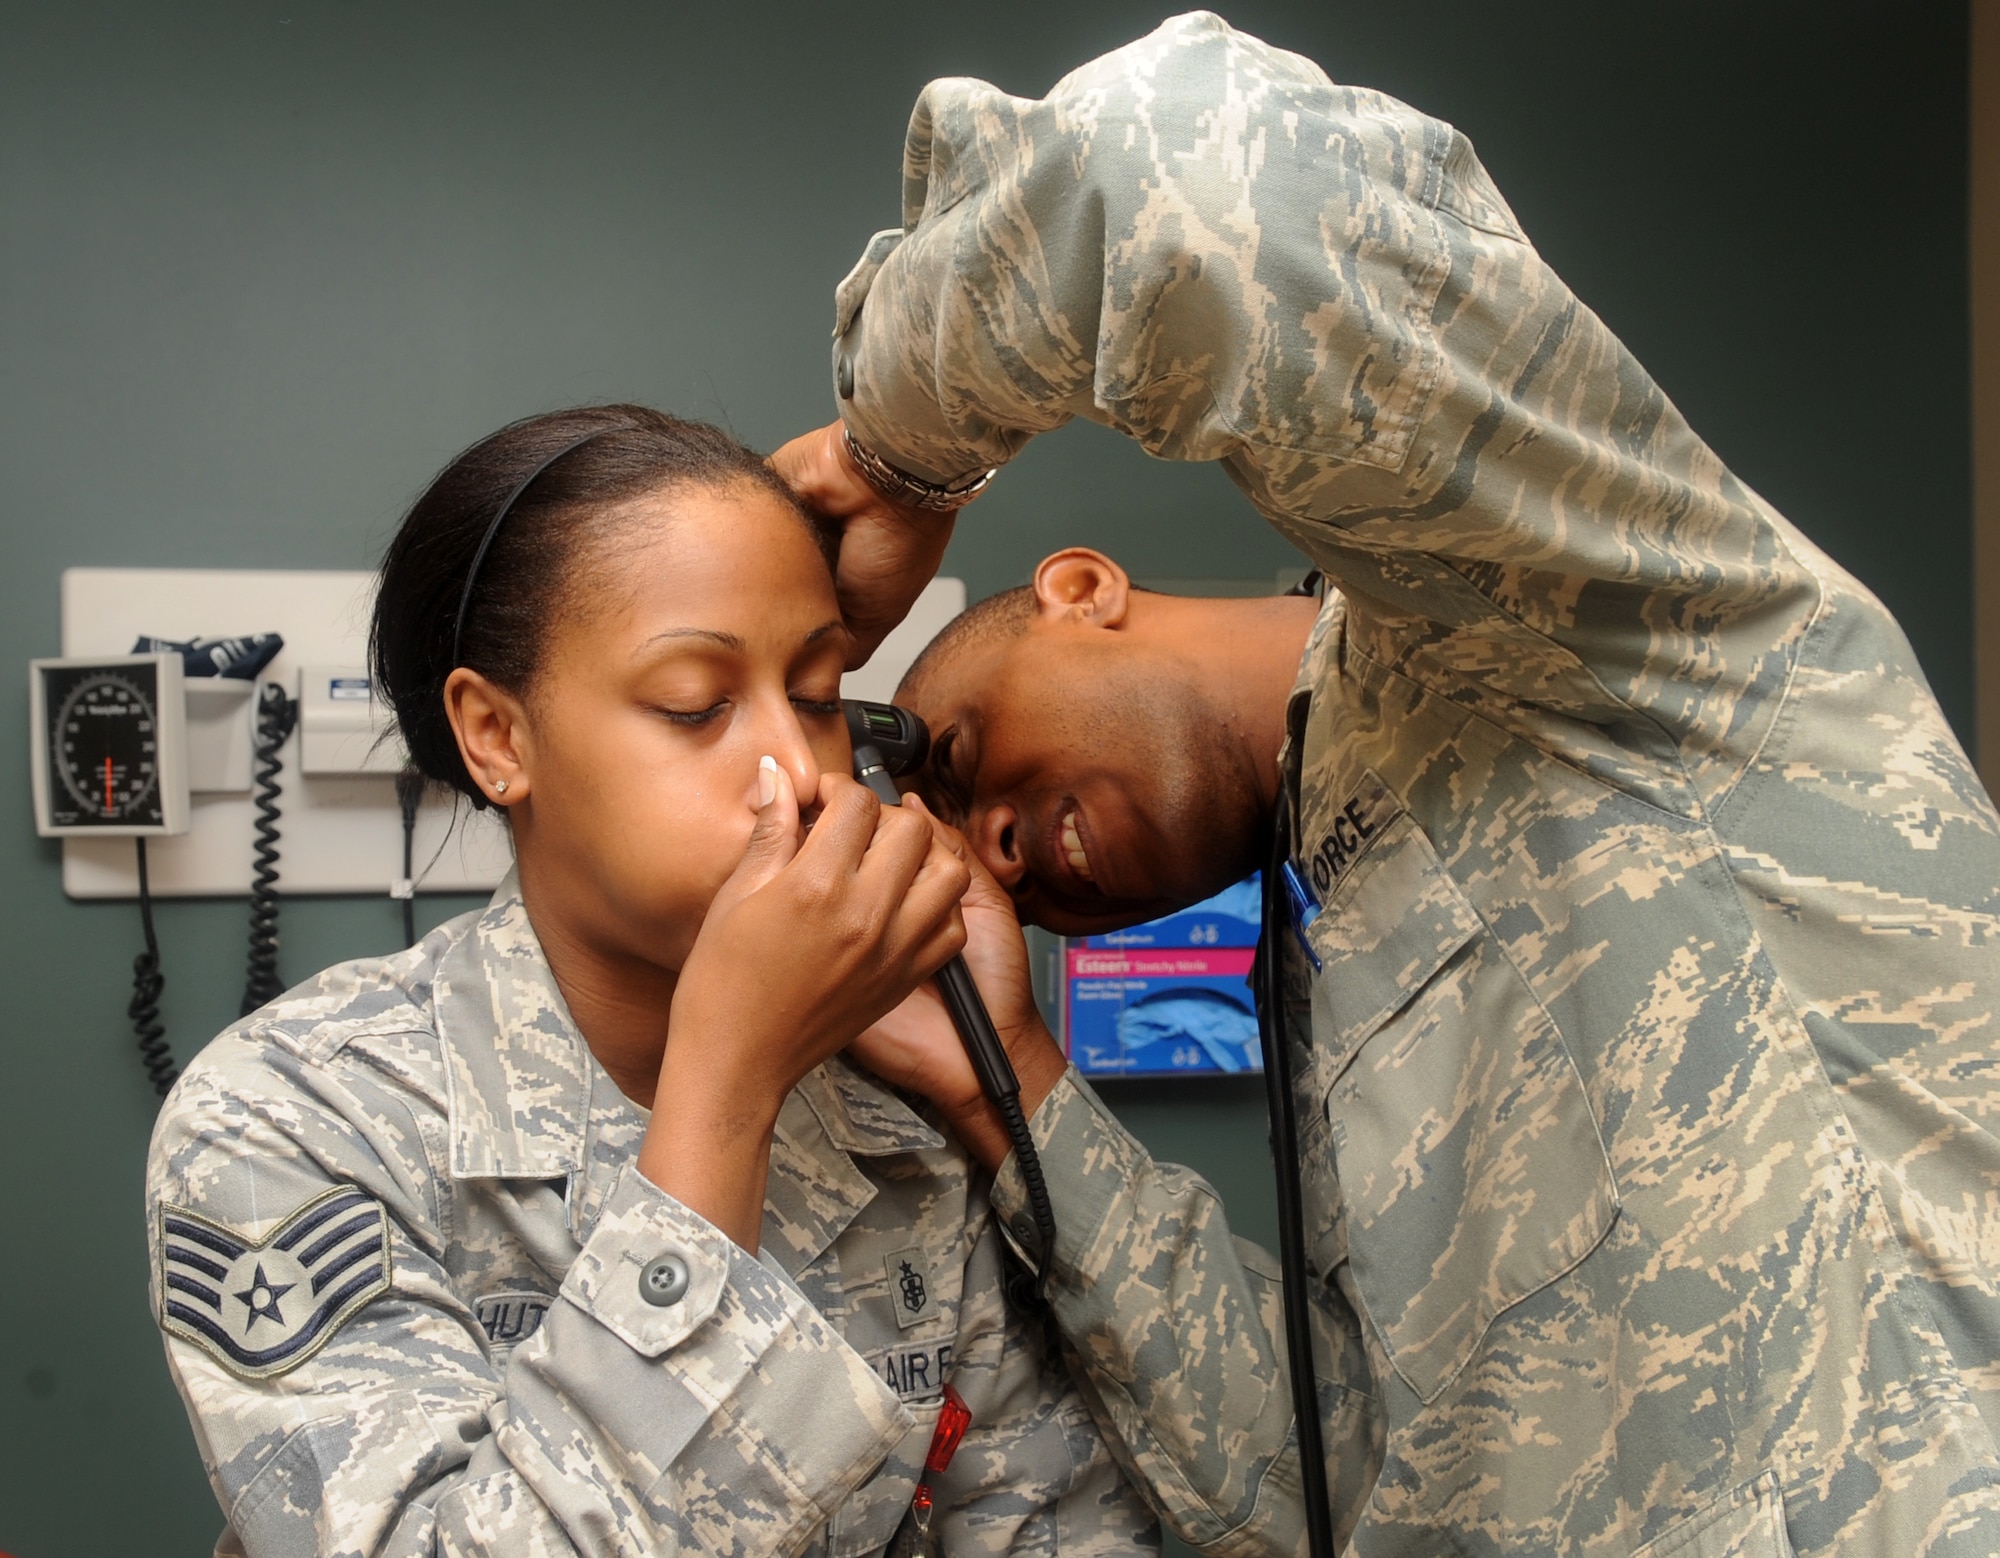 Staff Sgt. Netasha Hutto-Harris, 2nd Medical Support Squadron, holds her nose as Capt. Mark Dudley, 2nd Medical Operations Squadron physician, examines the inside of her ear. The primary care managers at the base family health clinic see a variety of medical cases - from sinus infections to muscular injuries - every day. (U.S. Air Force photo/Senior Airman Kristin High) (RELEASED)
